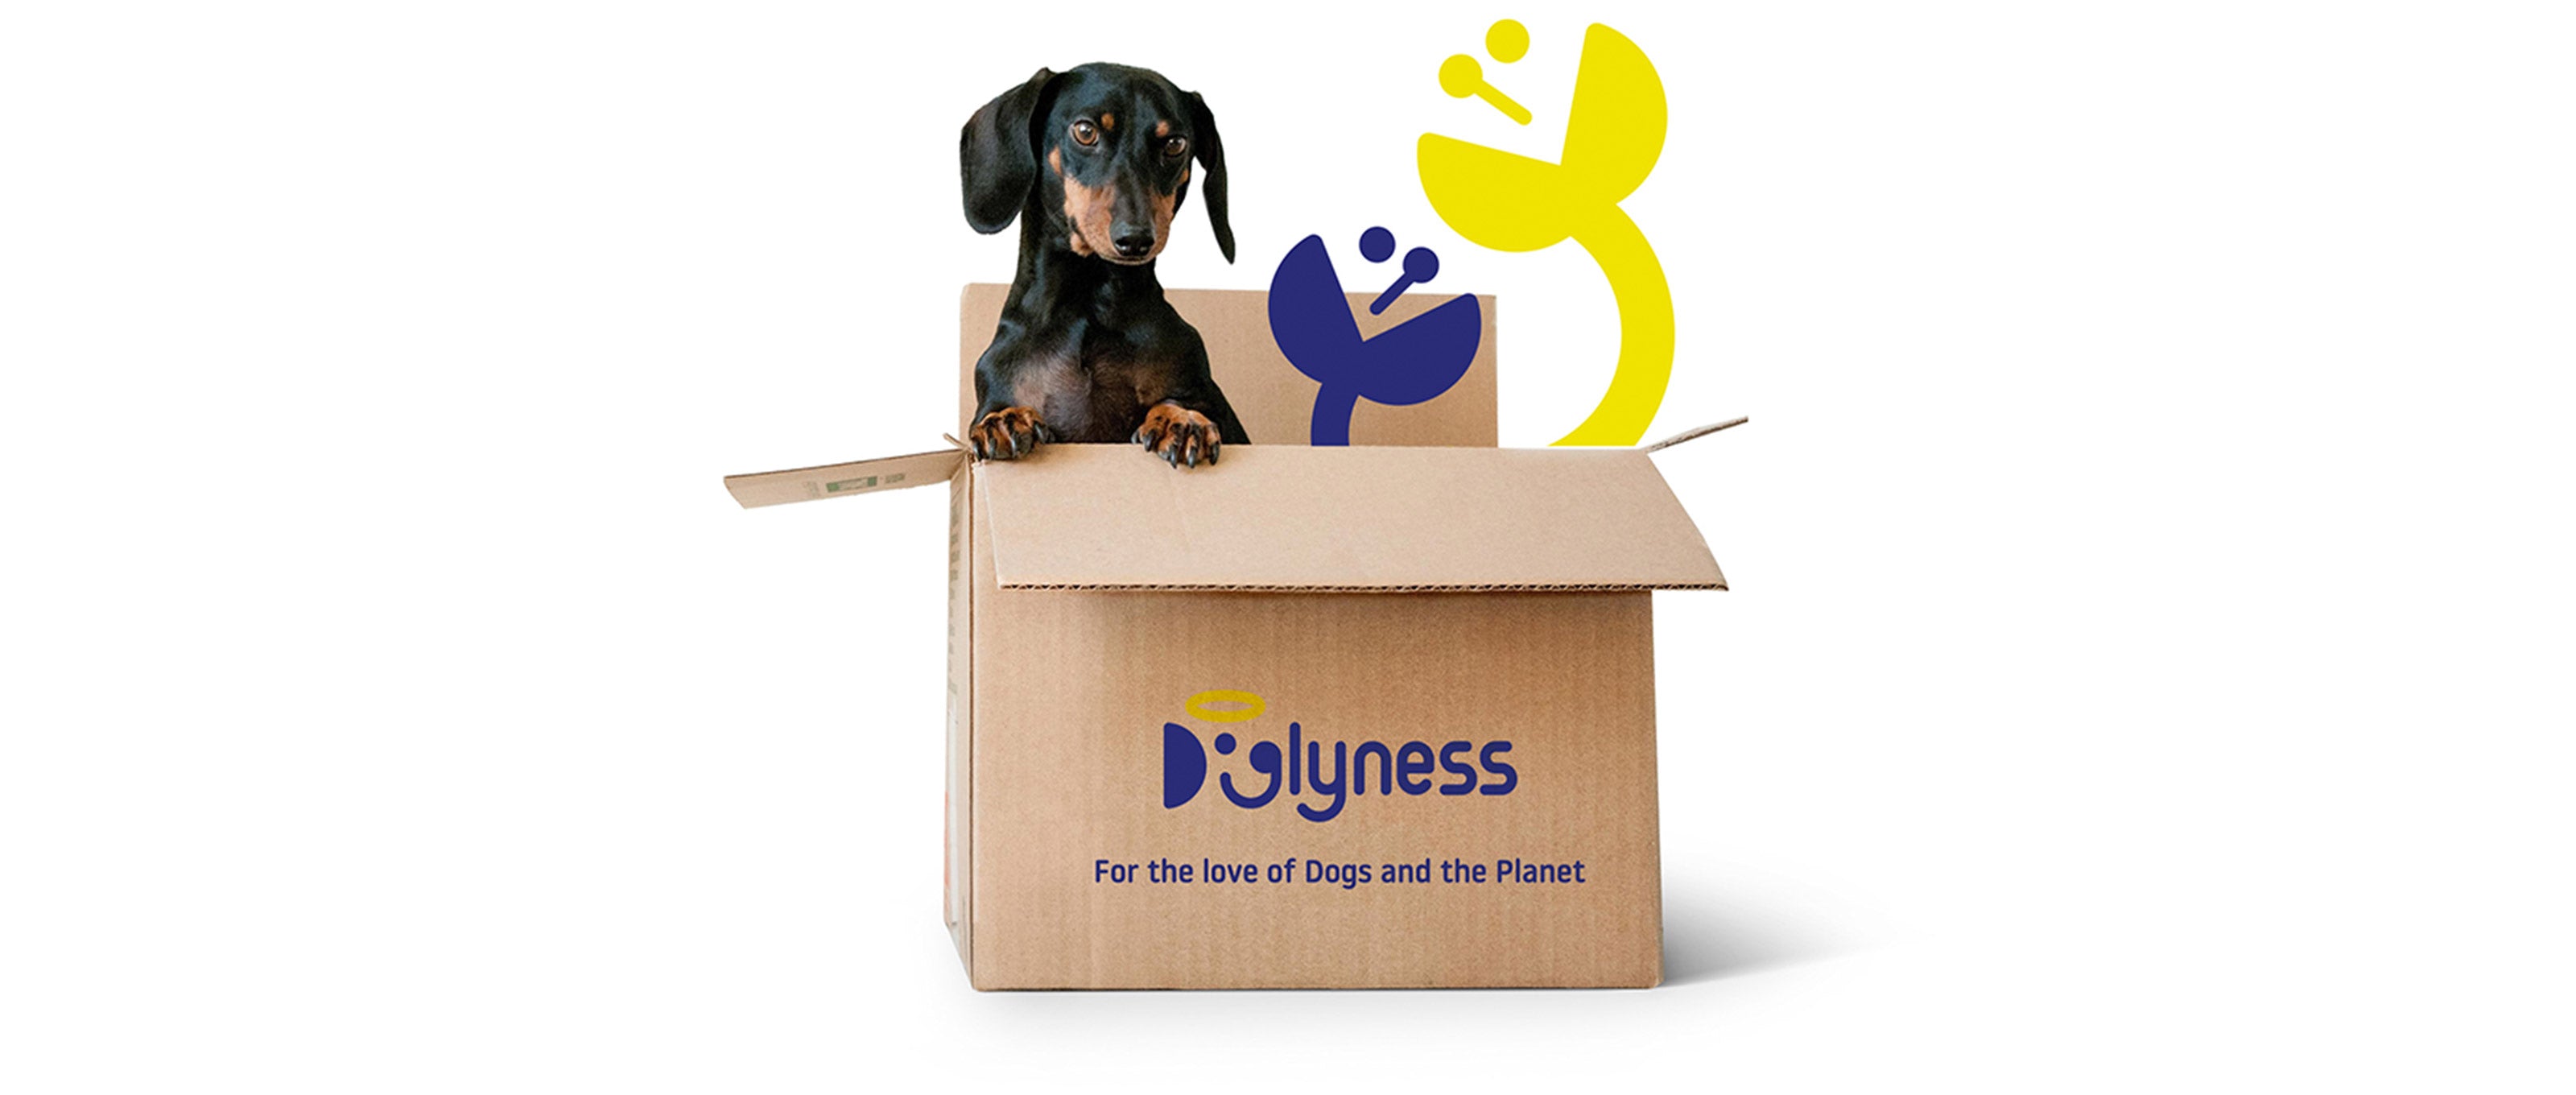 Doglyness, for the love of dogs and the planet!